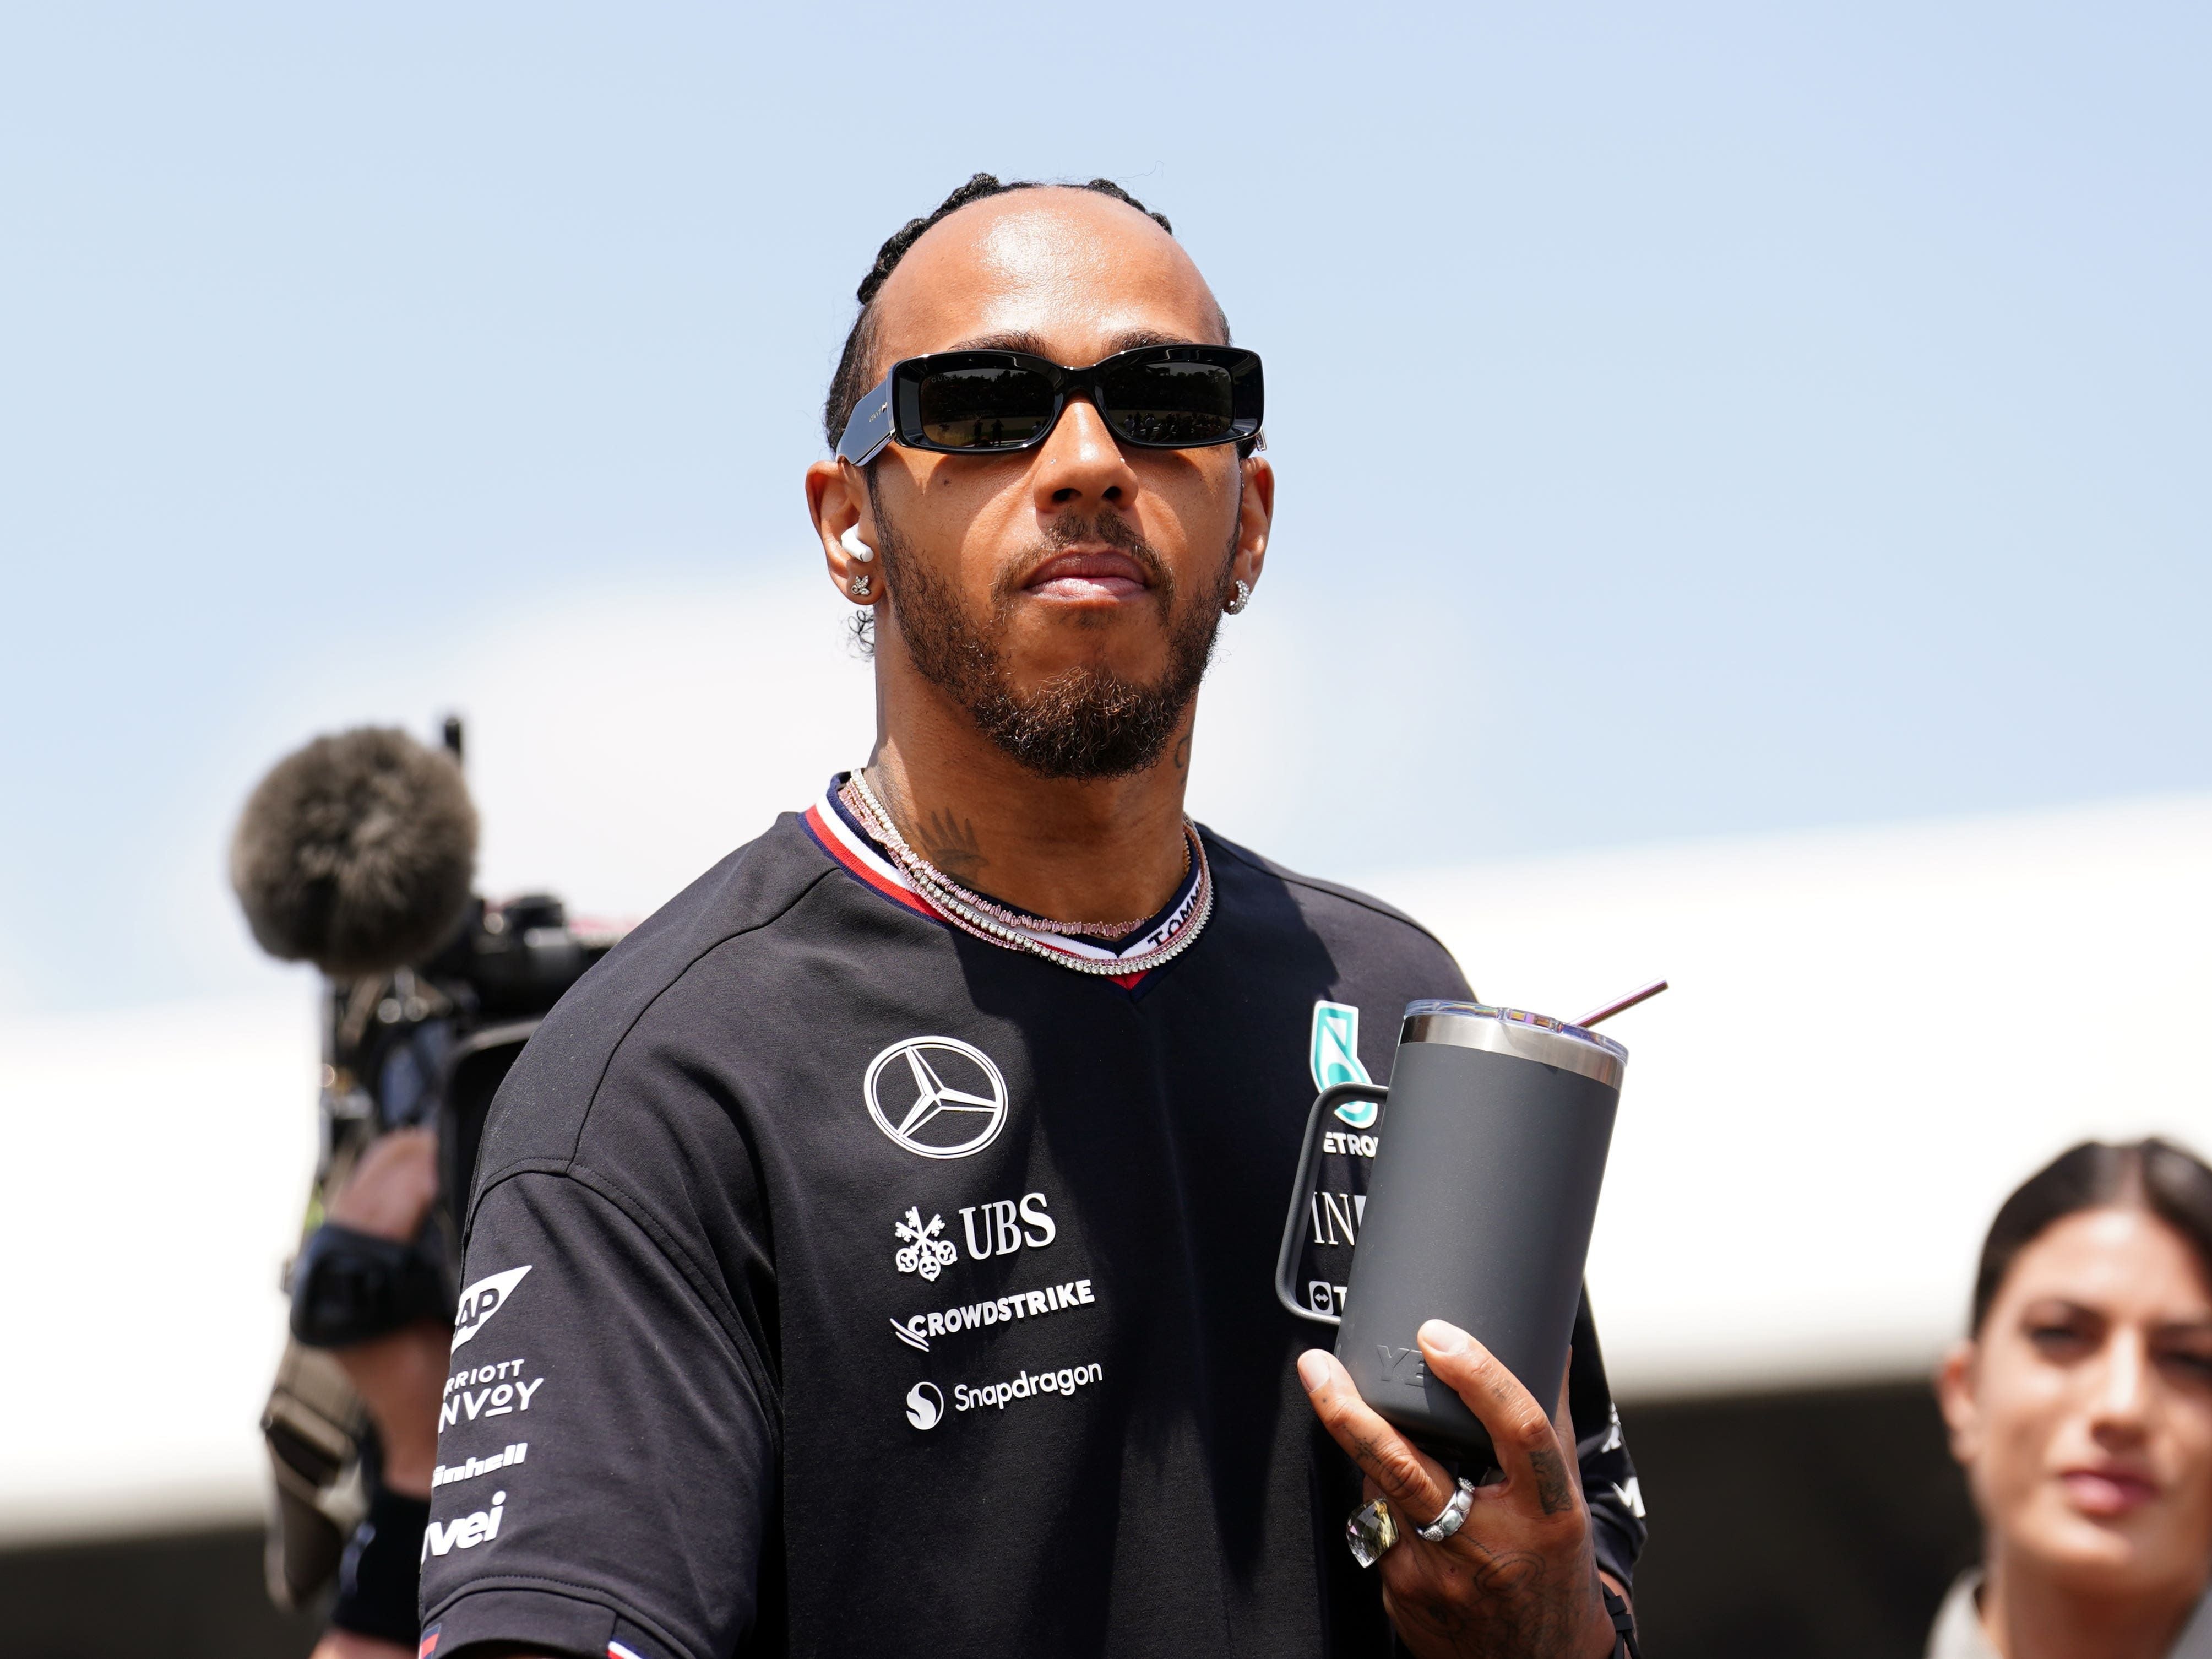 Lewis Hamilton has no time for negativity amid ‘sabotage’ claims at Mercedes